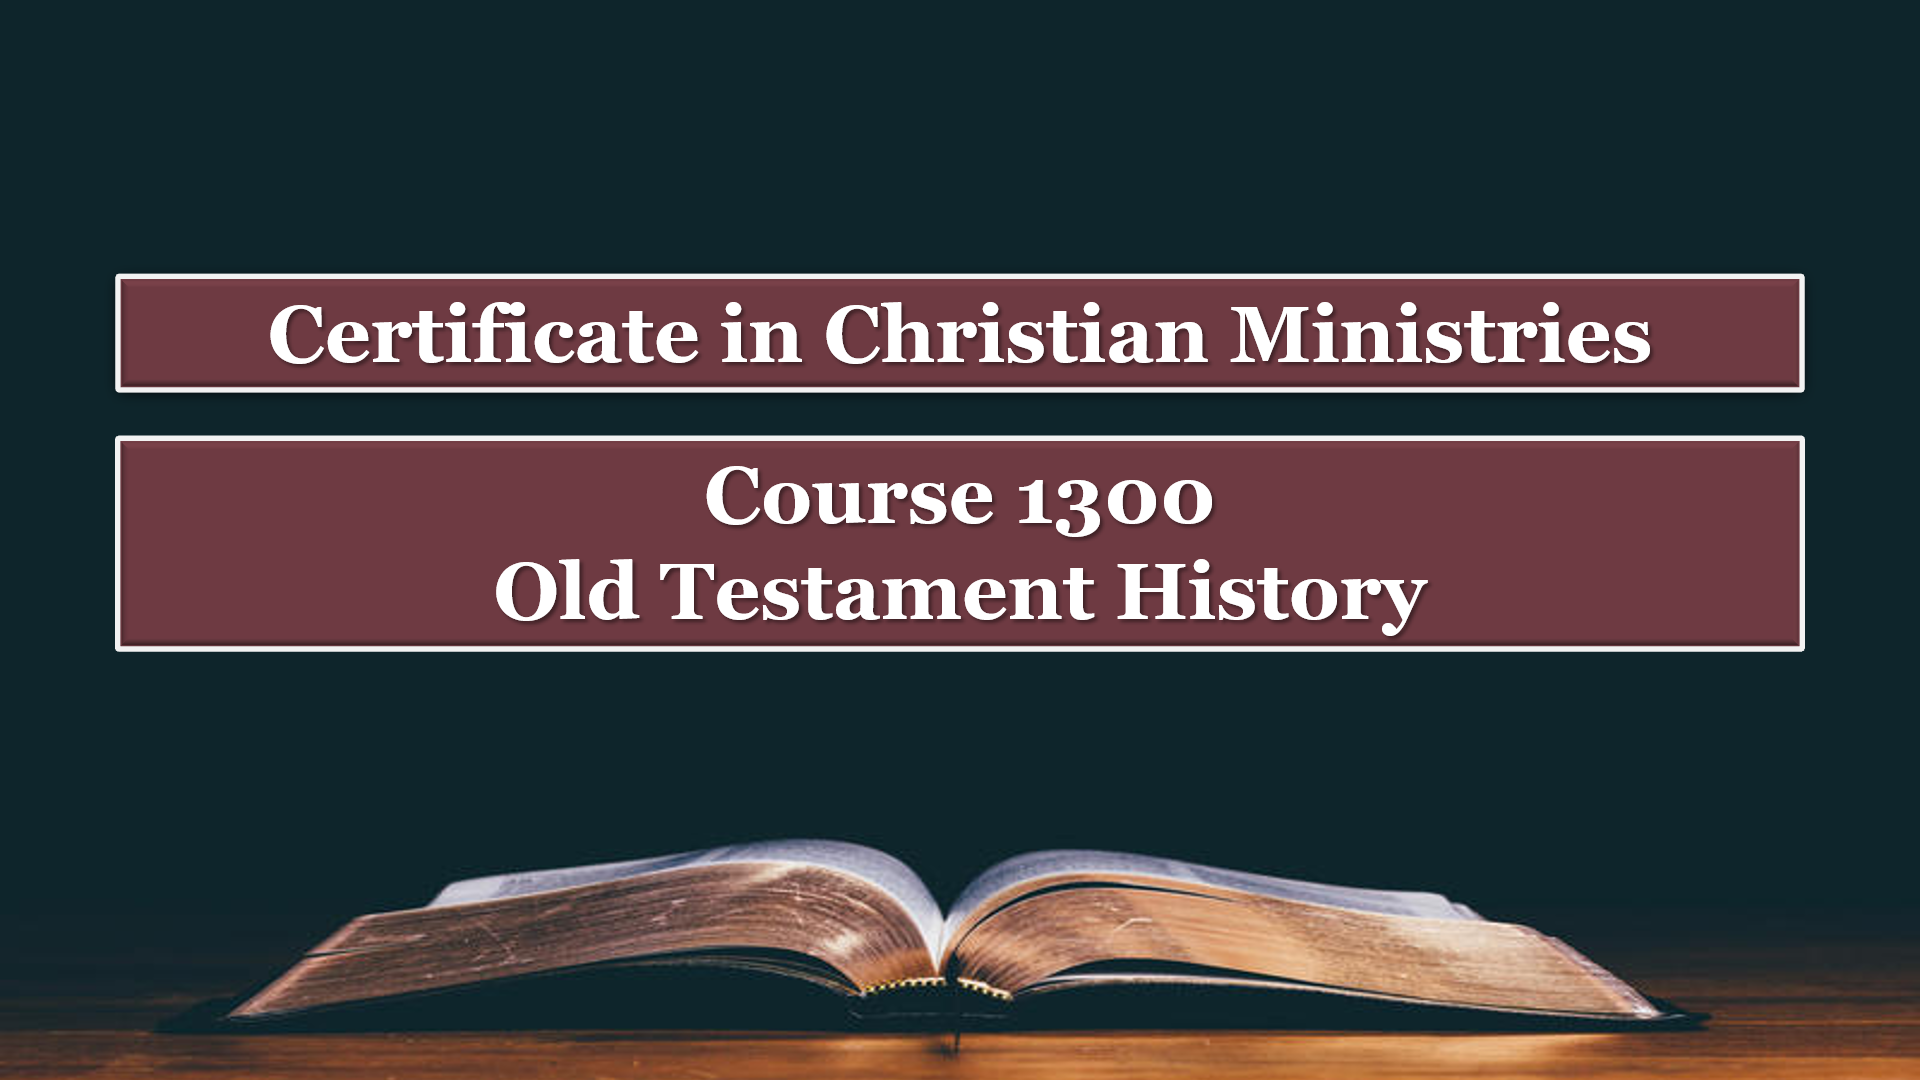 Course 1300: Old Testament History